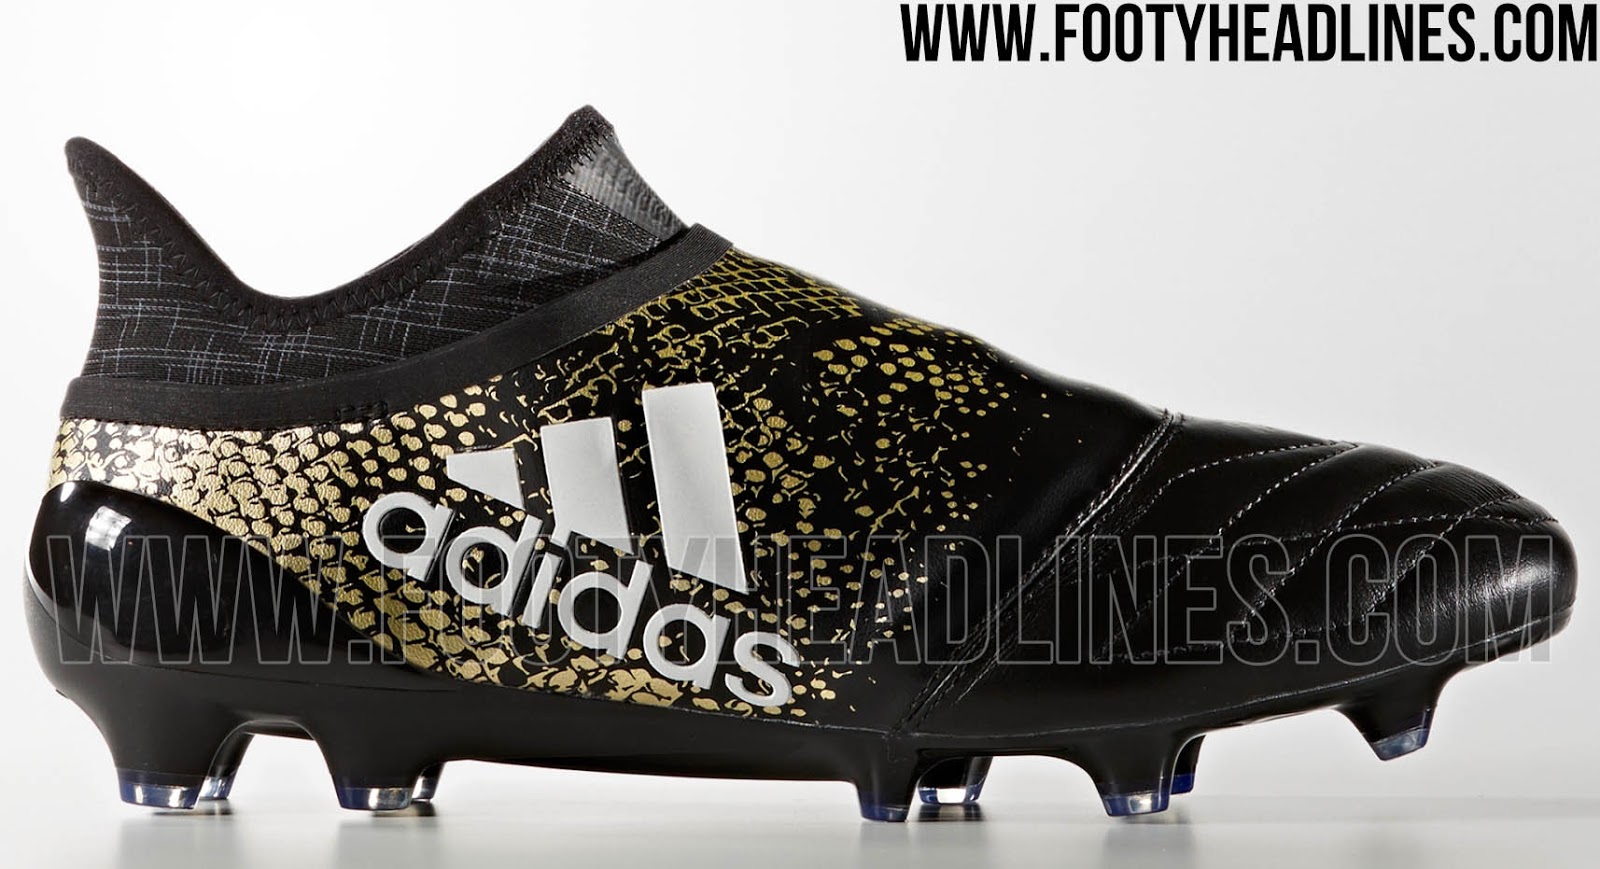 Black / Gold Adidas PureChaos 2016-2017 Leather Stellar Pack Boots Released - Footy Headlines